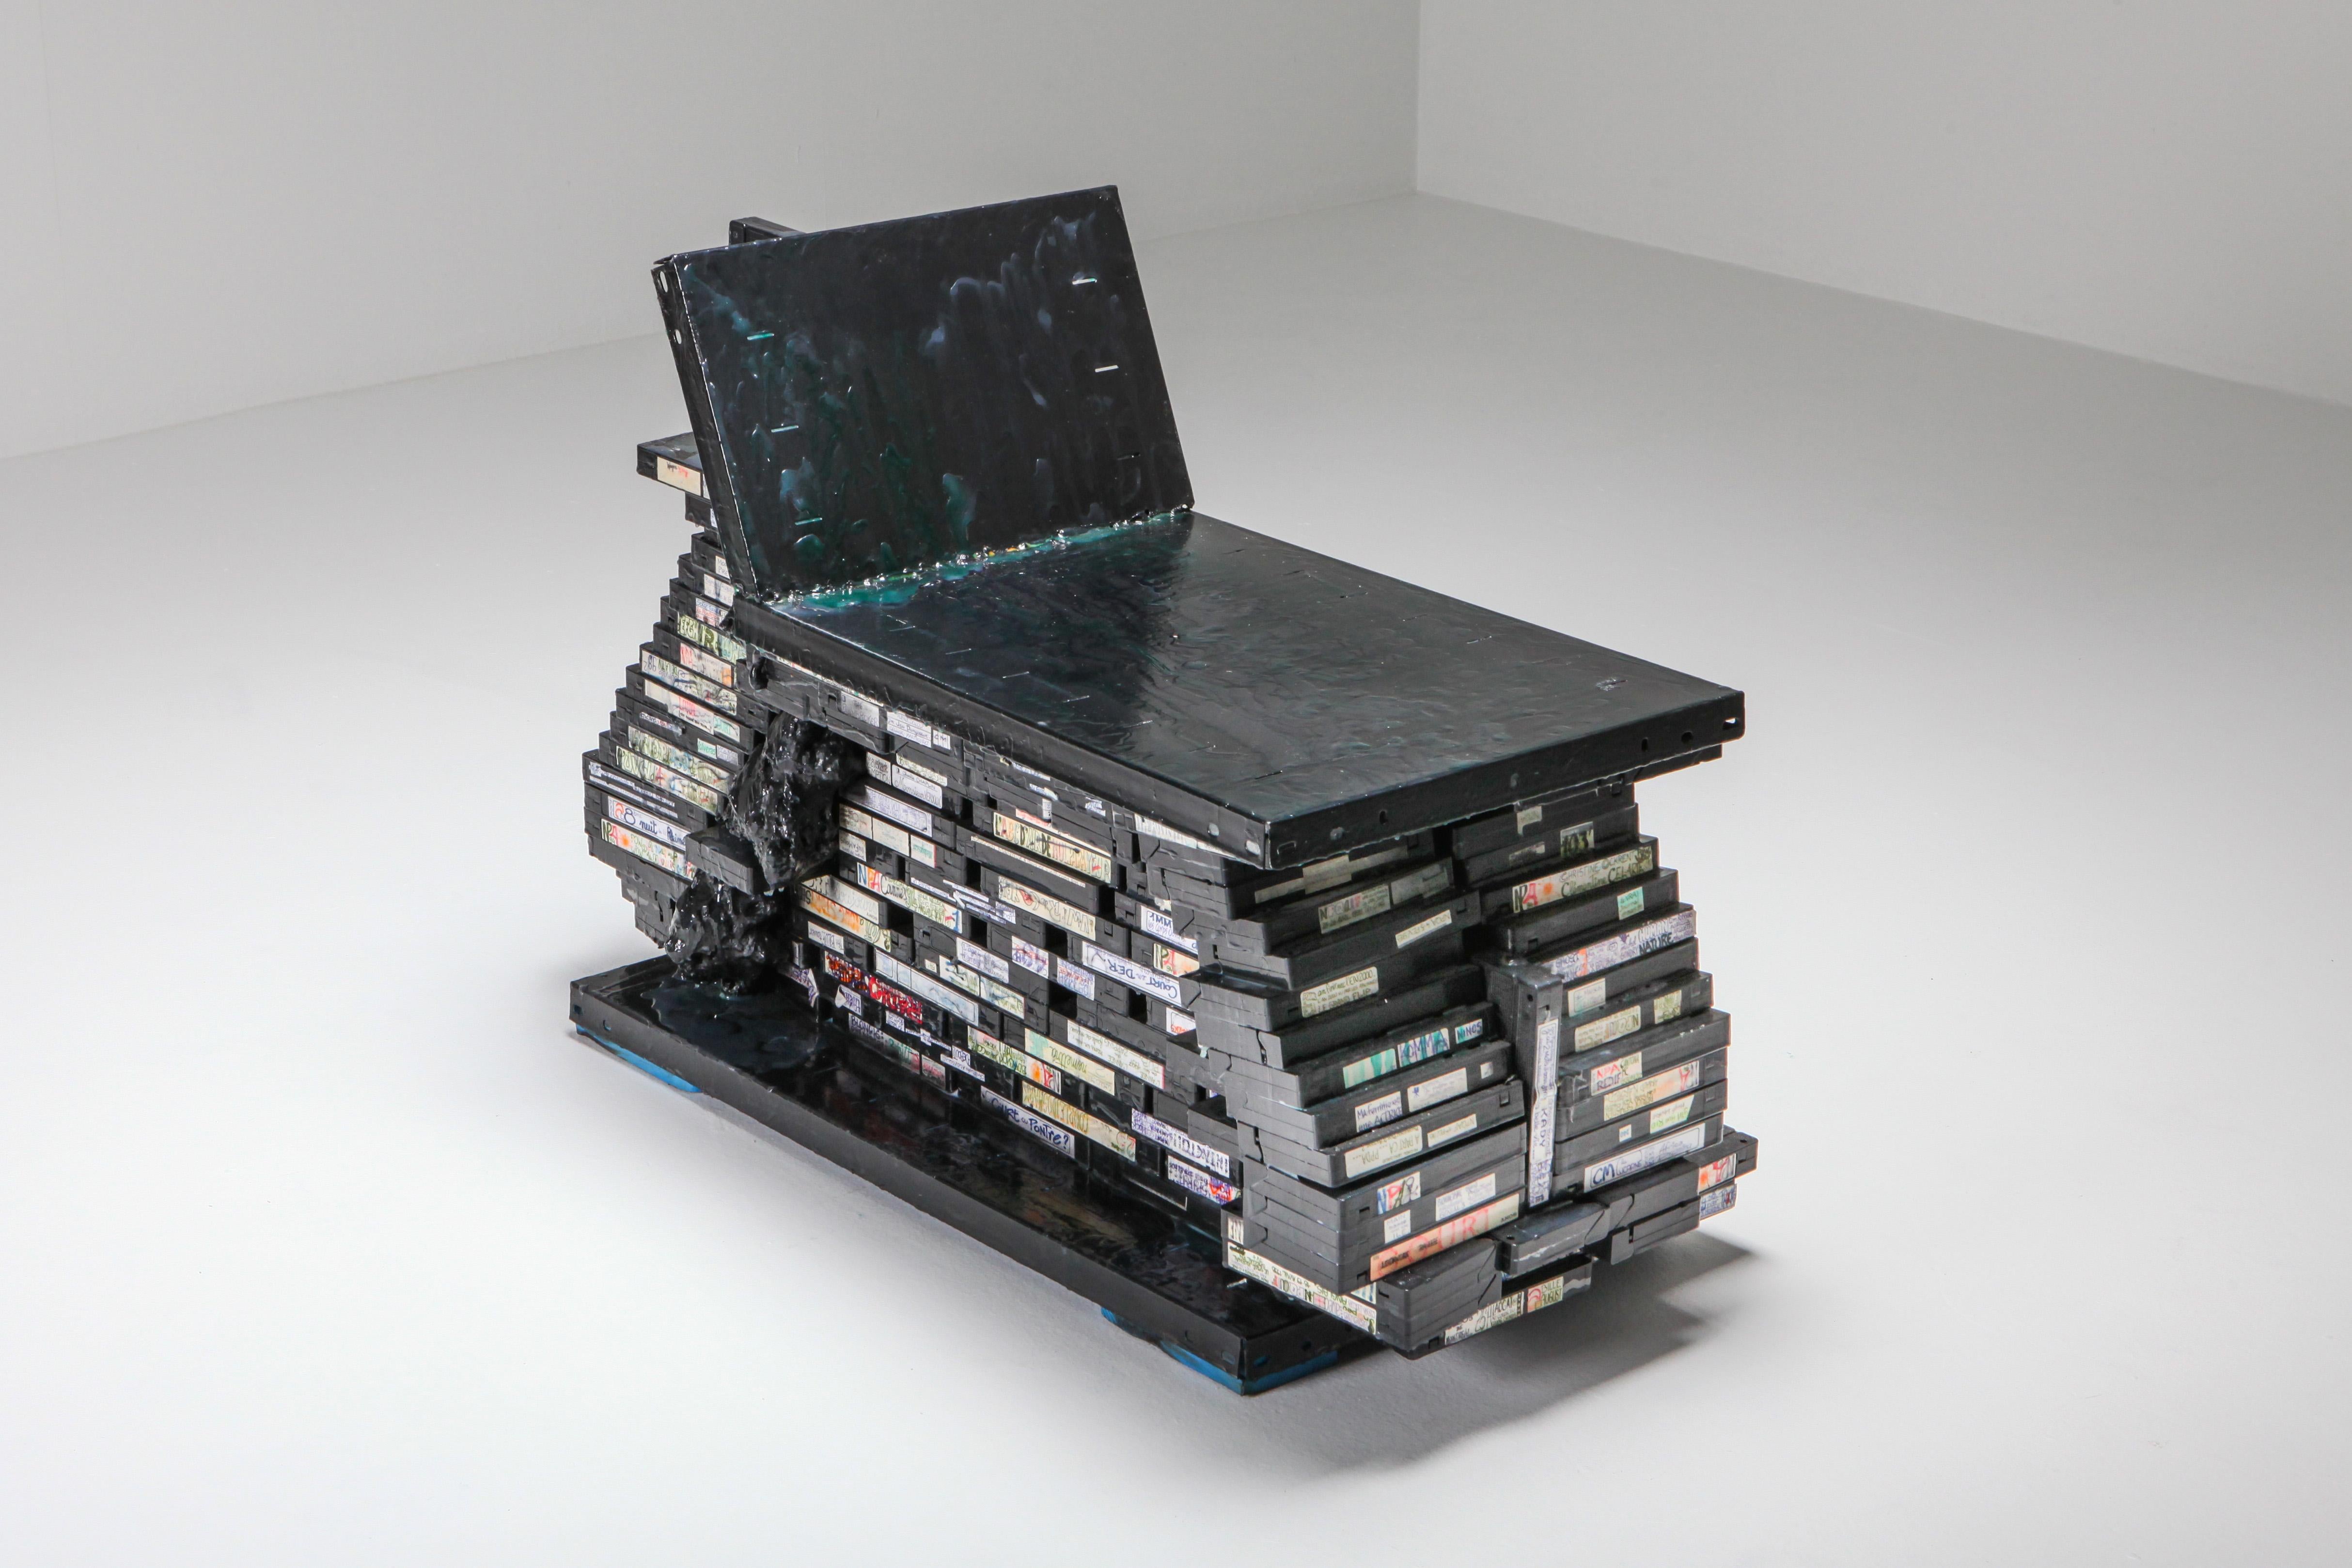 The ‘Frozen Culture’ chair is a unique functional art piece with a history. Constructed from a set of 35,000 VHS cassettes that were recorded over the course of 25 years by an individual and later bought by Lionel Jadot. The collector was a graphic